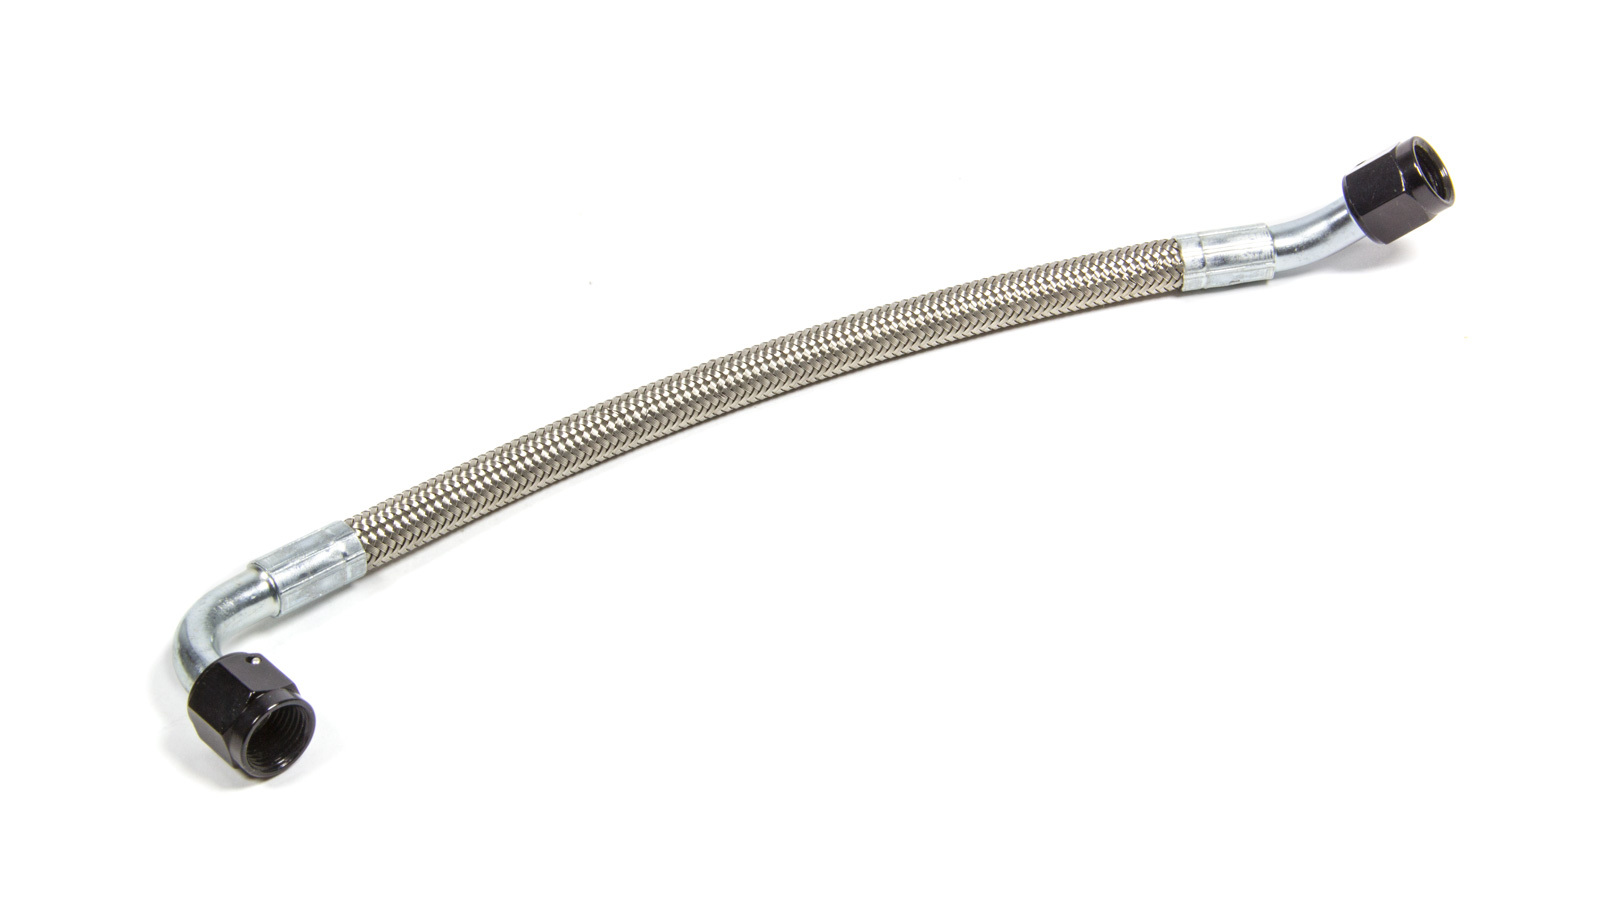 FAST 54028FSL Fuel Rail Supply Line, 6 AN Braided Stainless, 90 Degree Hose End, 45 Degree Hose End, GM LS-Series, GM F-Body 1998-2002, Each